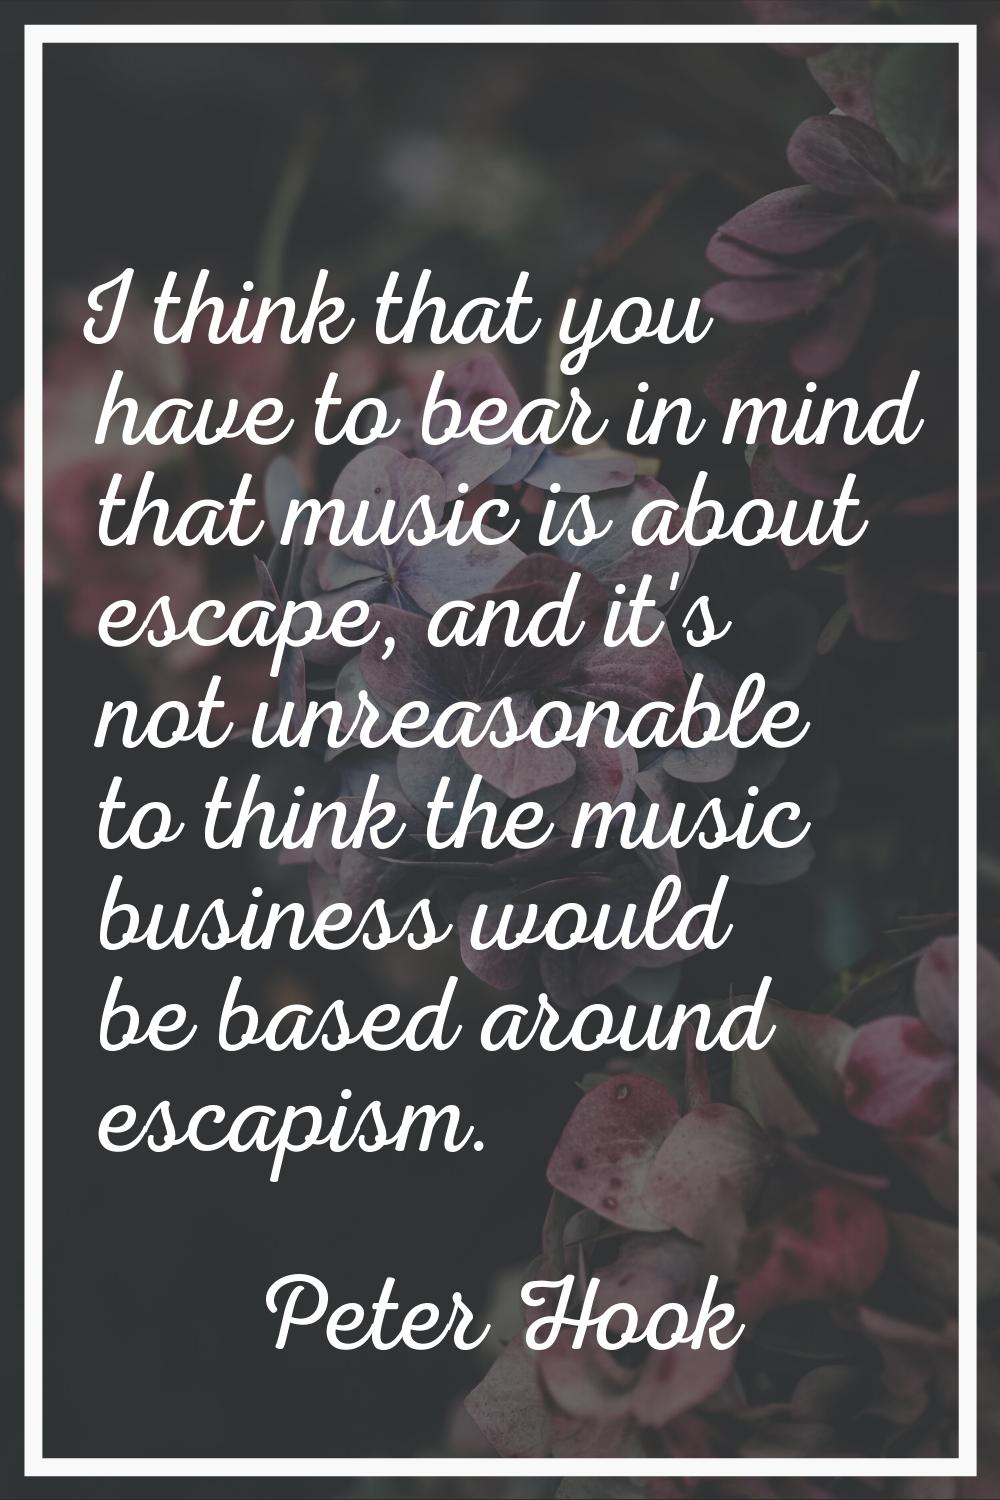 I think that you have to bear in mind that music is about escape, and it's not unreasonable to thin